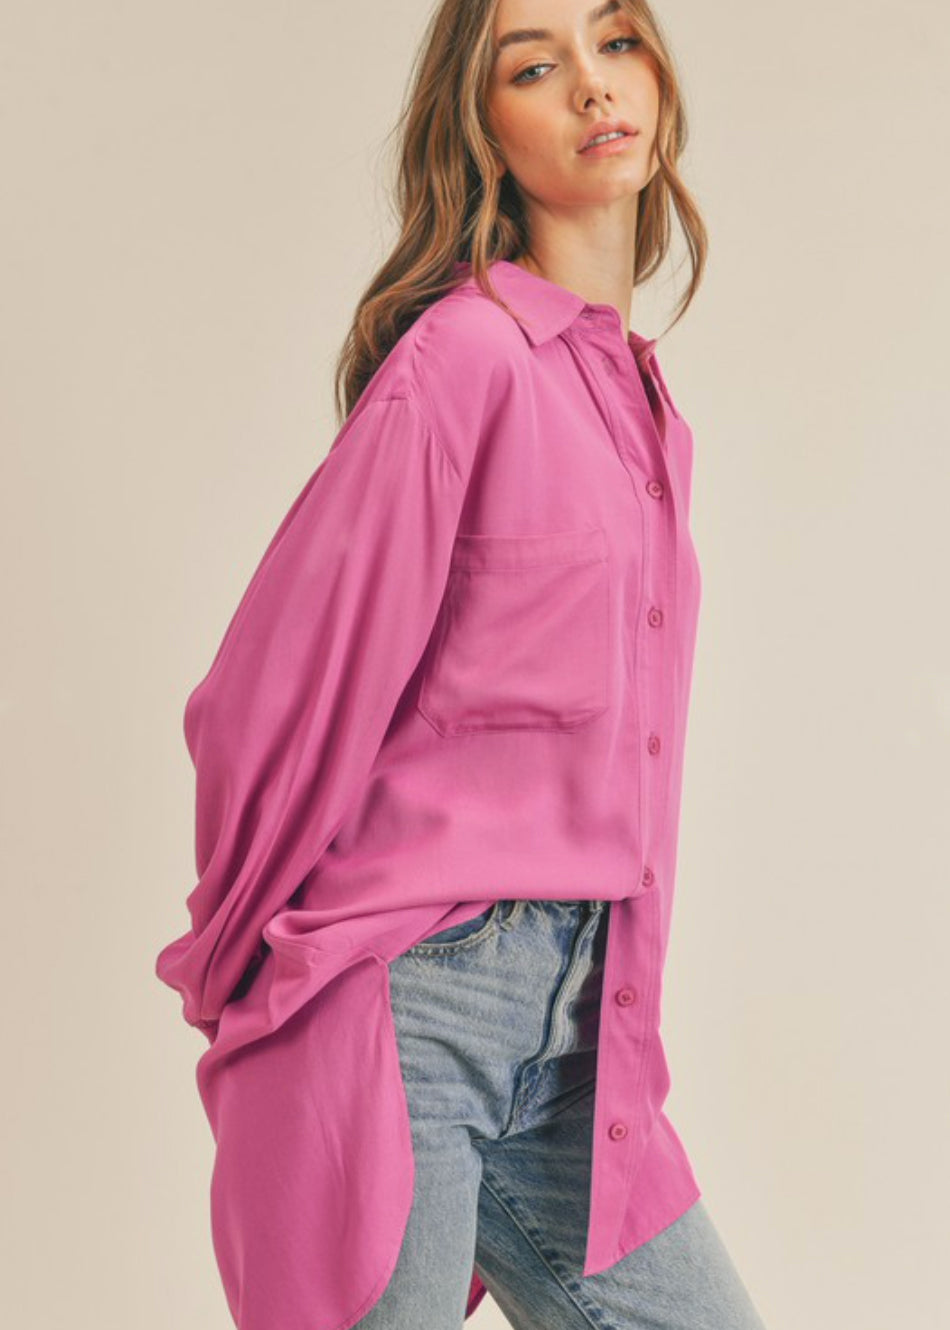 Wild Orchid Tunic Button Up - Jade Creek Boutique